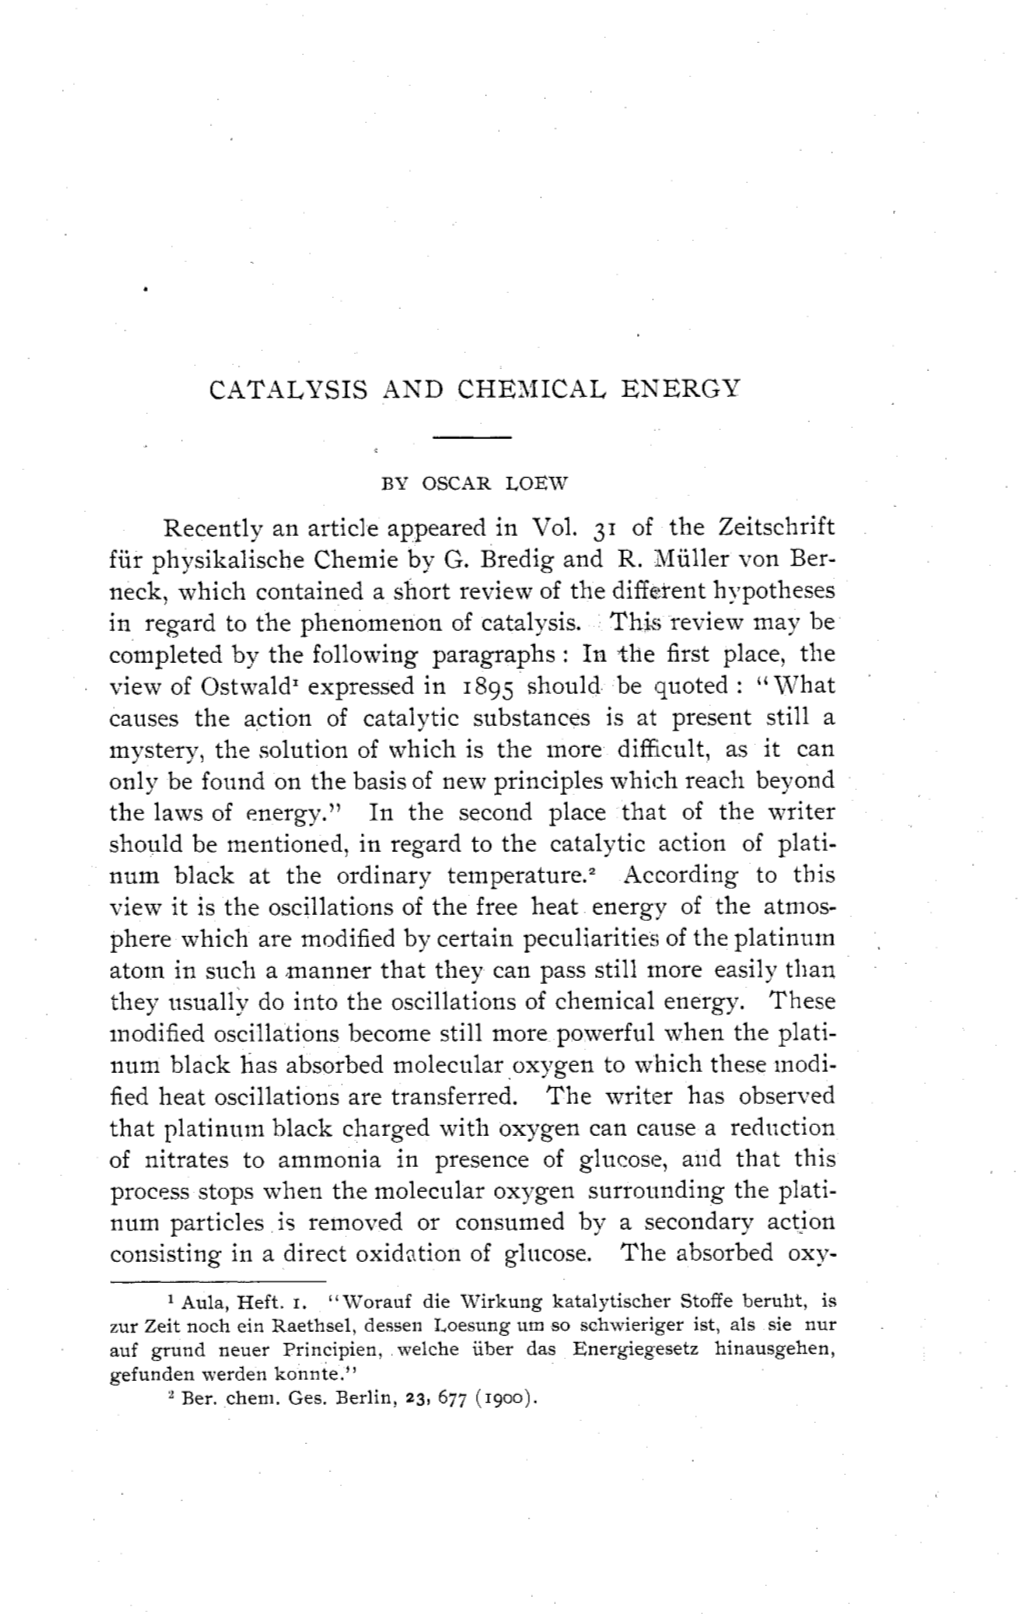 CATALYSIS and CHEXICAL ENERGY Recently an Article